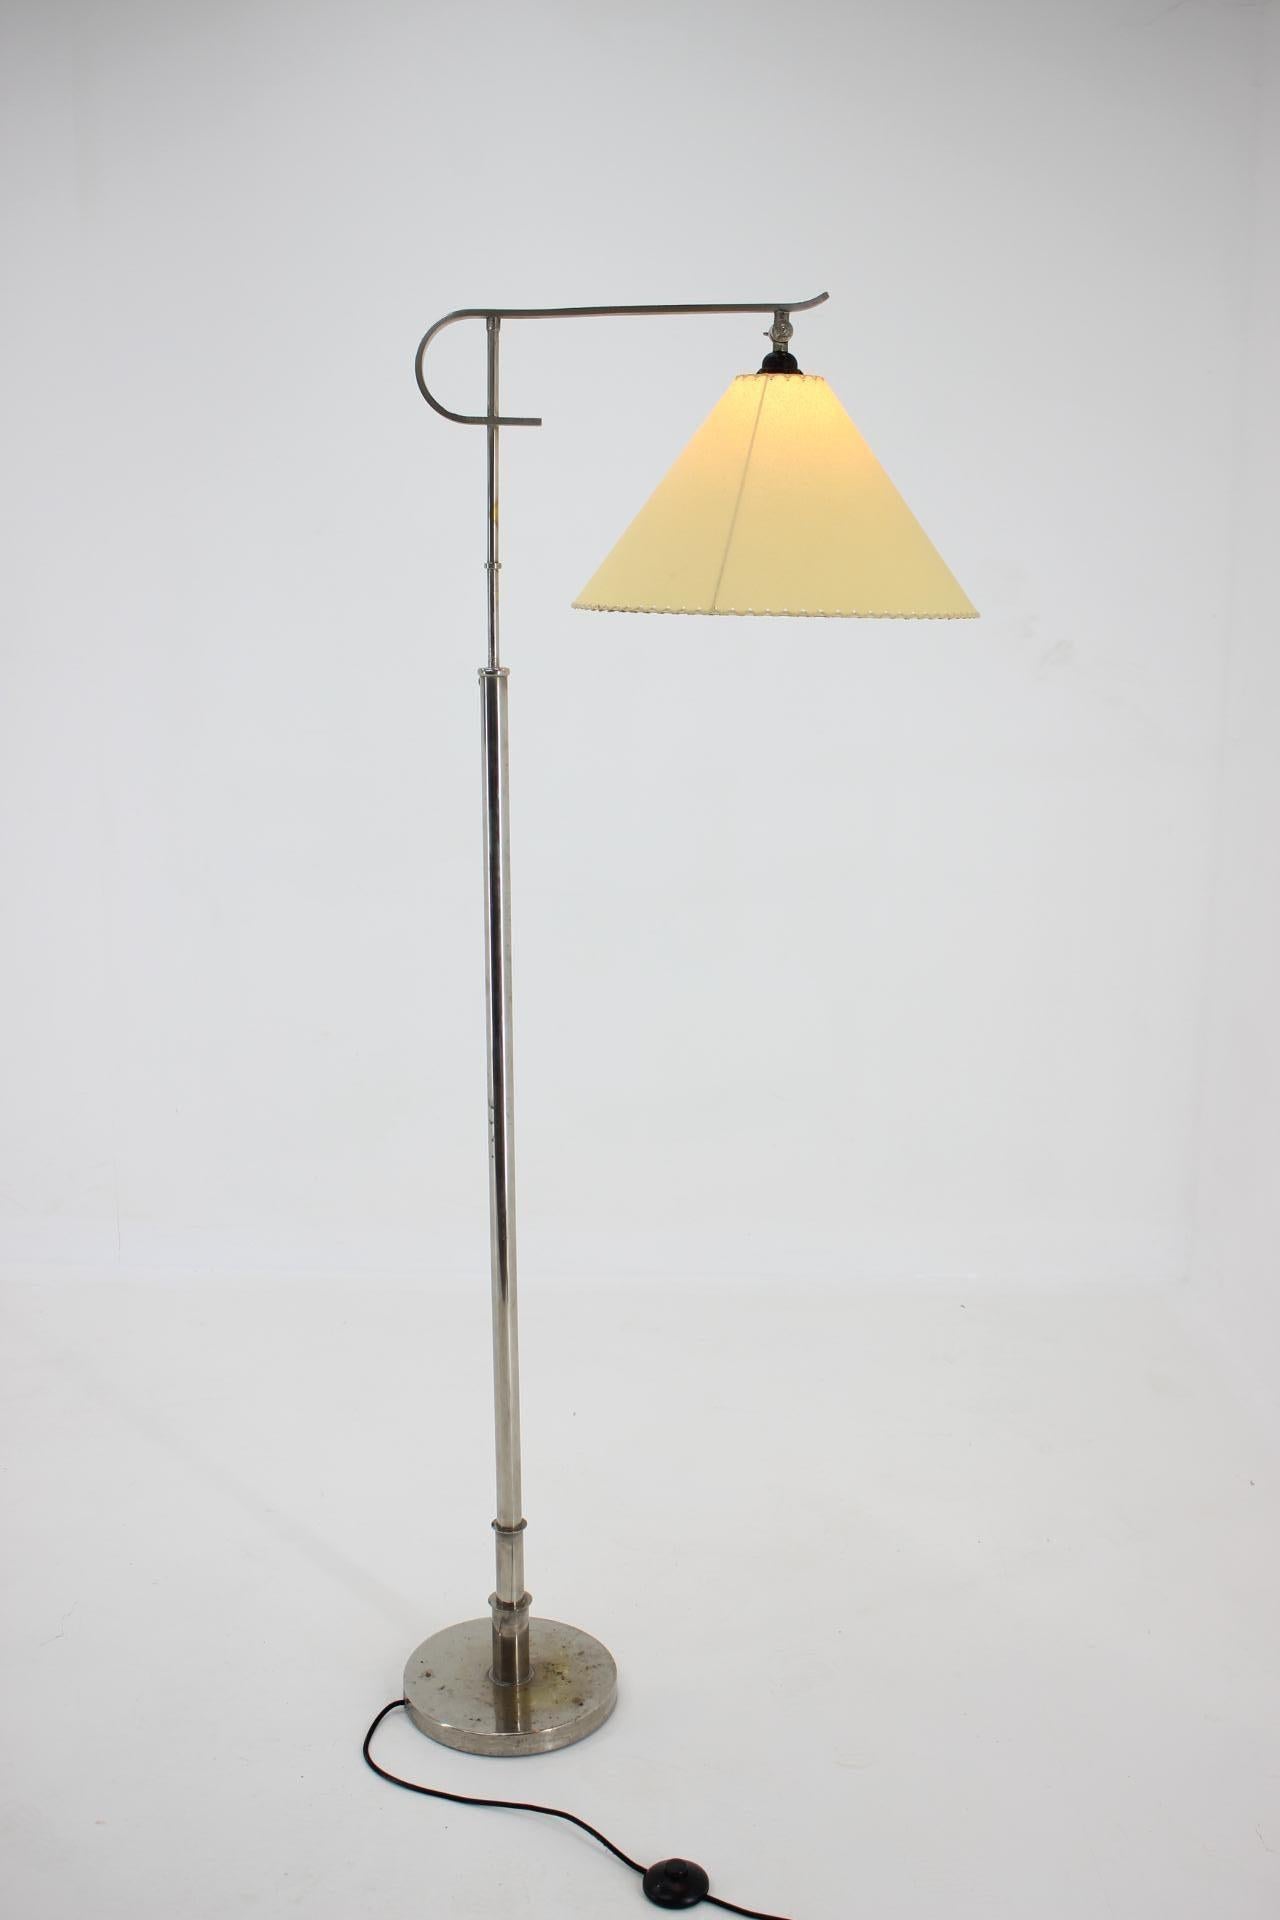 - Functionalism, Bauhaus
- Czechoslovakia, 1930s
- Original condition, patina
- adjustable height 152-164cm
- new parchment paper hand made shade
jt.